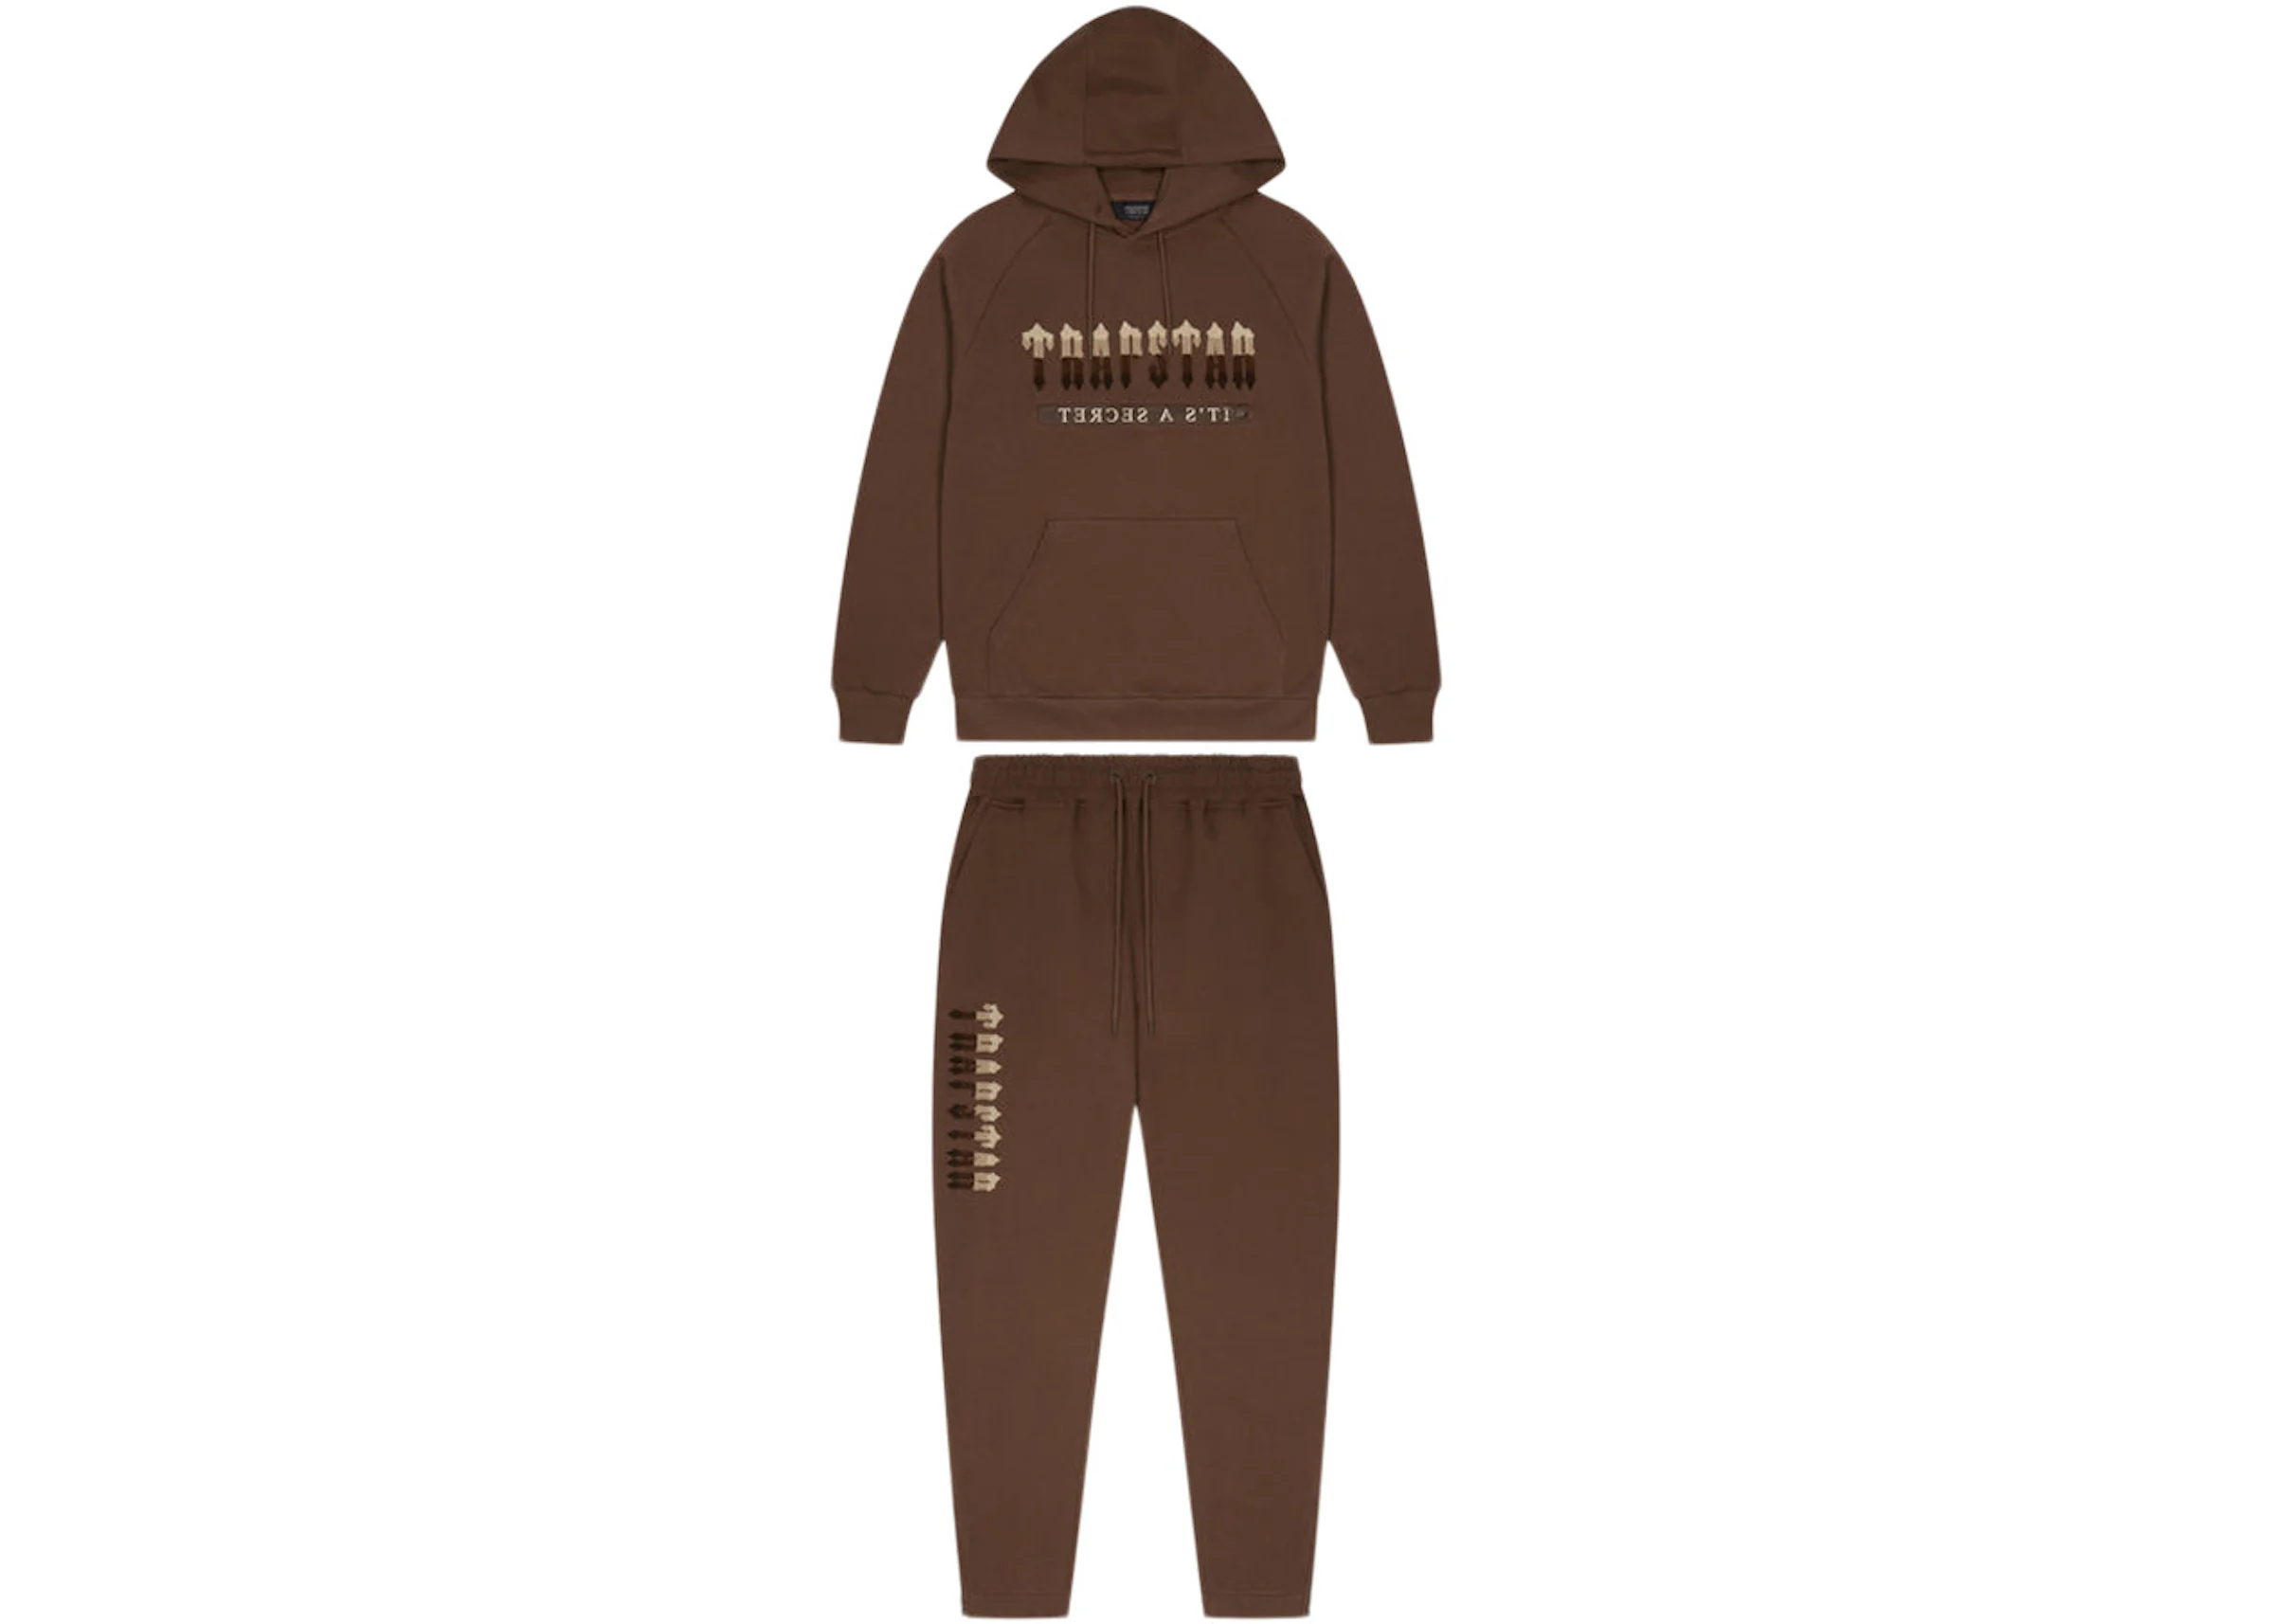 https://images.stockx.com/images/Trapstar-Chenille-Decoded-20-Hooded-Tracksuit-Earth-Edition.jpg?fit=fill&bg=FFFFFF&w=1200&h=857&fm=webp&auto=compress&dpr=2&trim=color&updated_at=1675169848&q=60